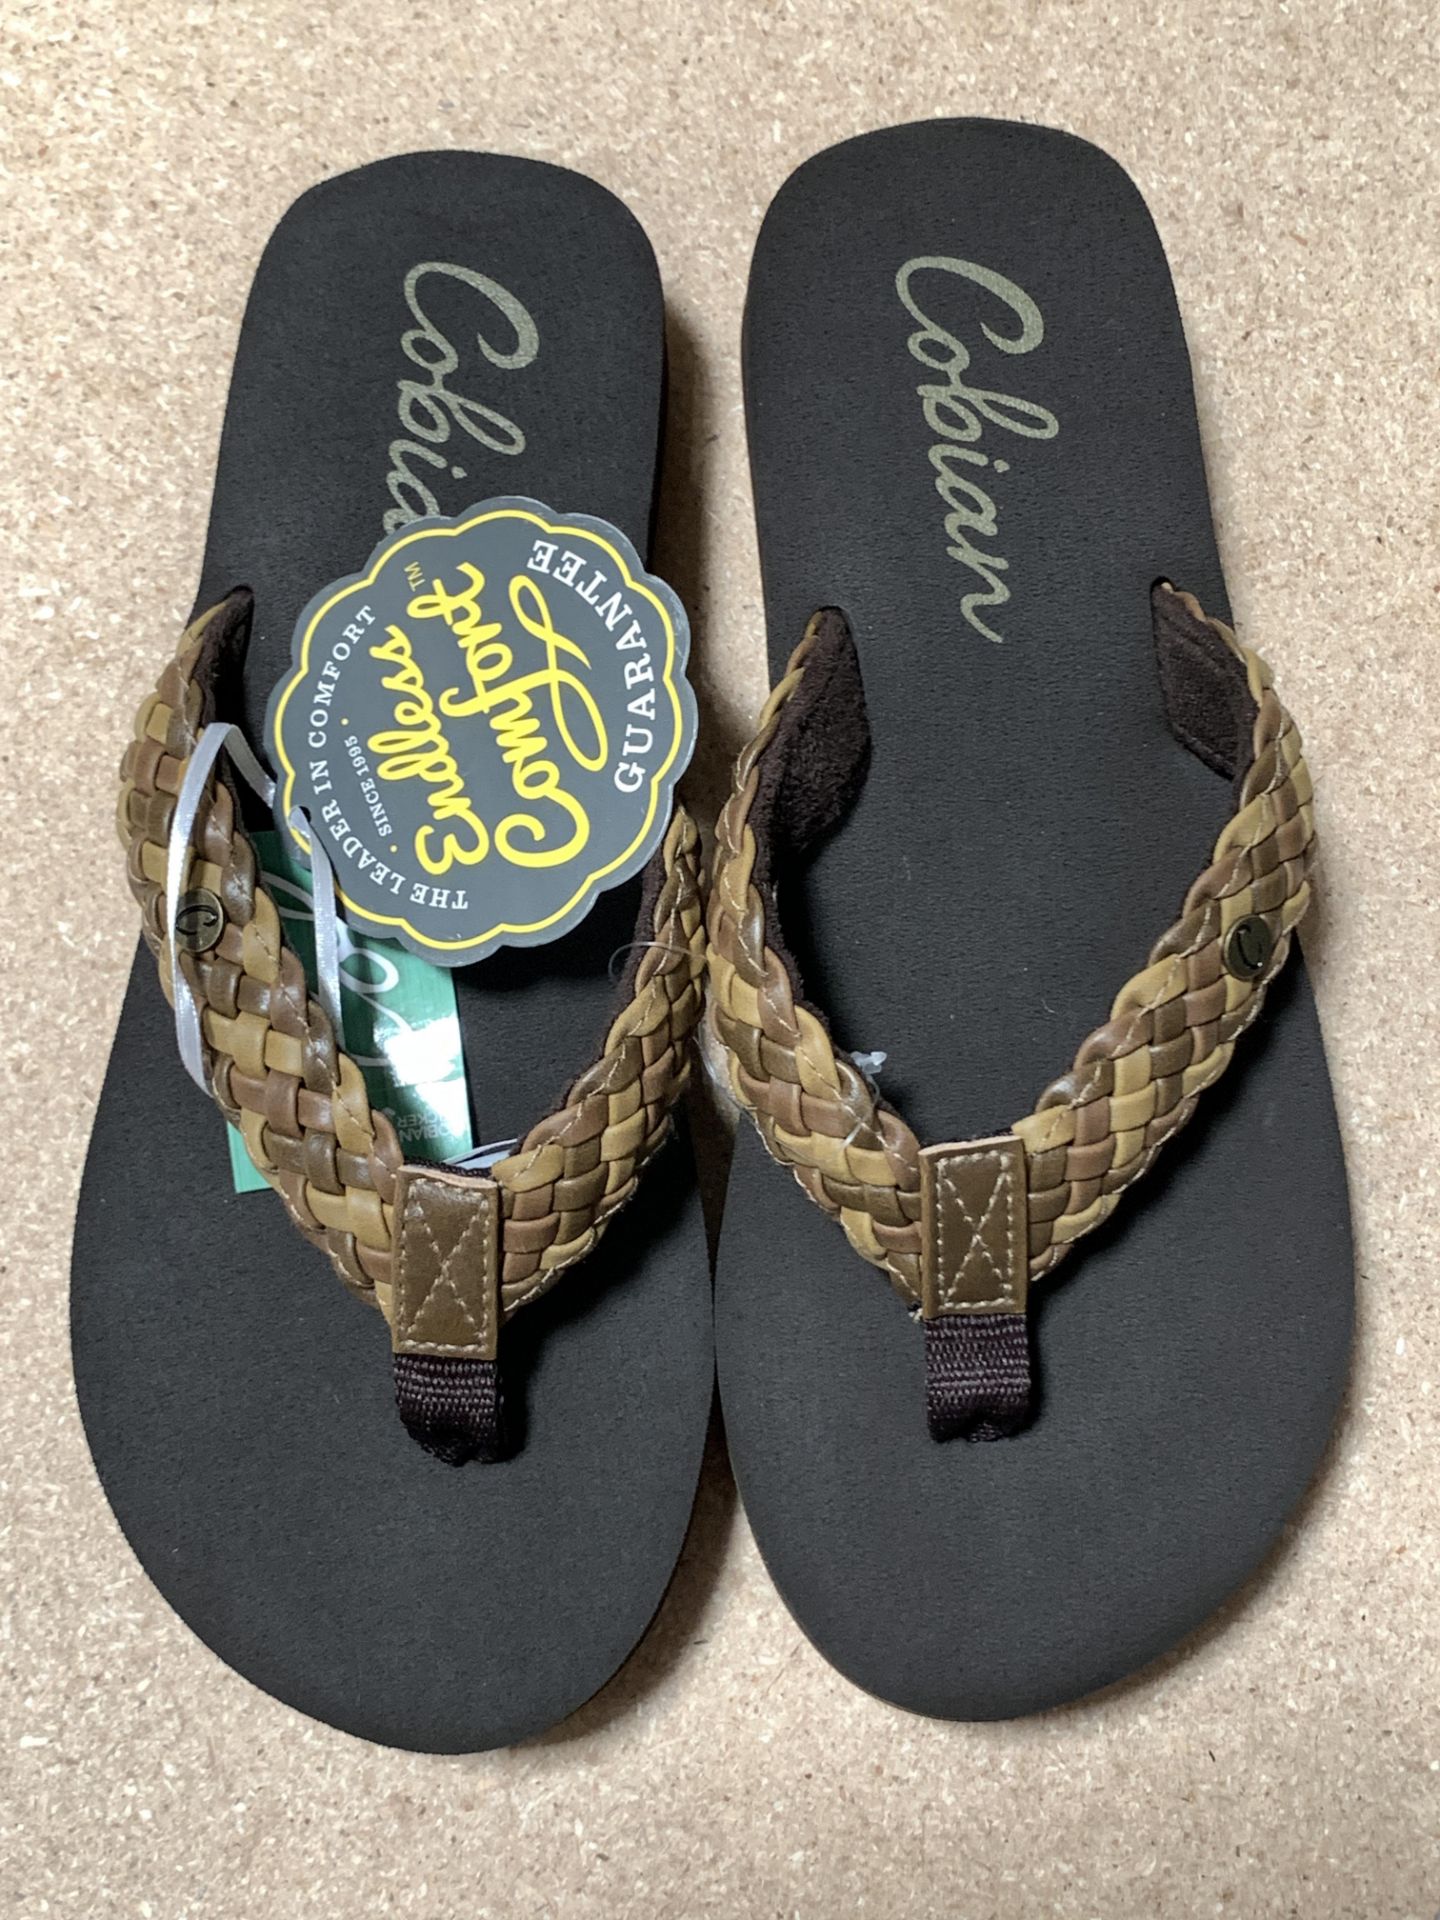 12 Pairs Cobian Flip Flop Sandals, Braided Bounce, New w. Tags, Various Sizes (Retail $468) - Image 3 of 6